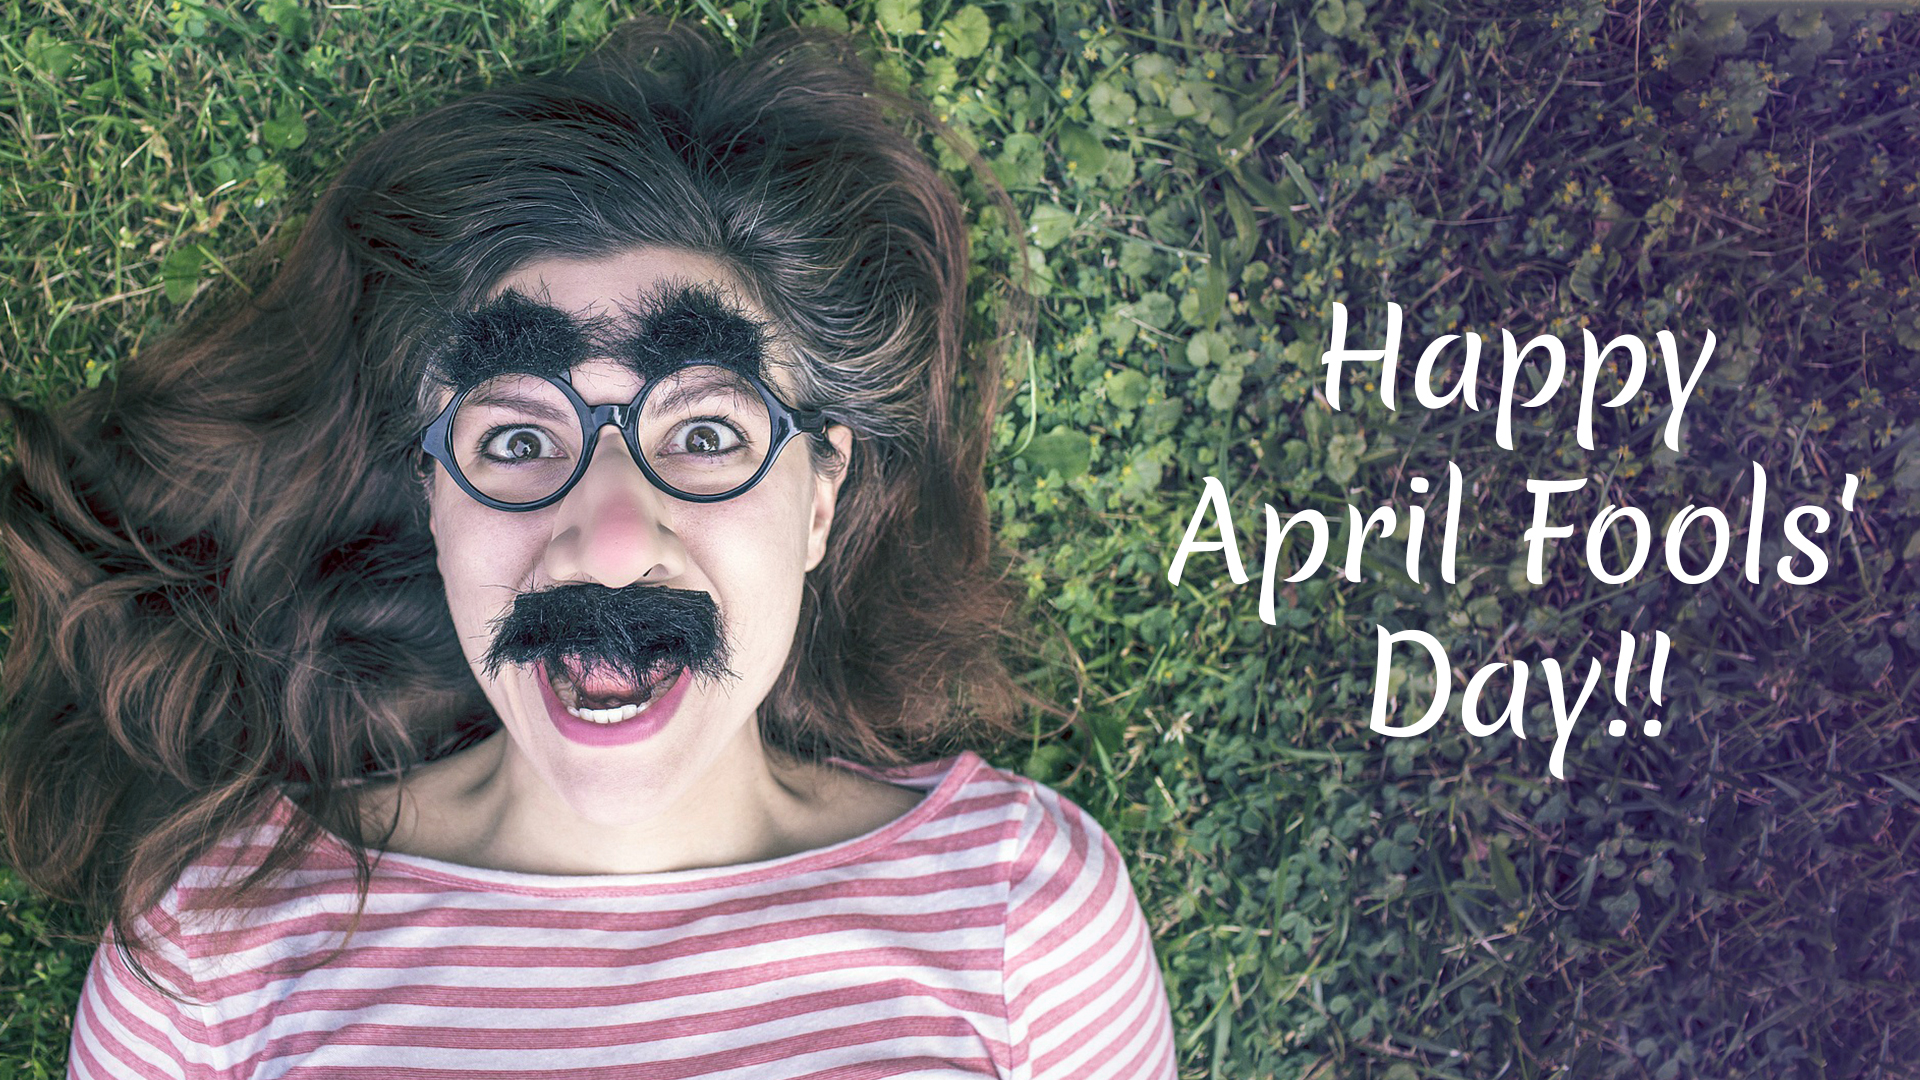 April Fools Day Images Funny Jokes Download for Free 